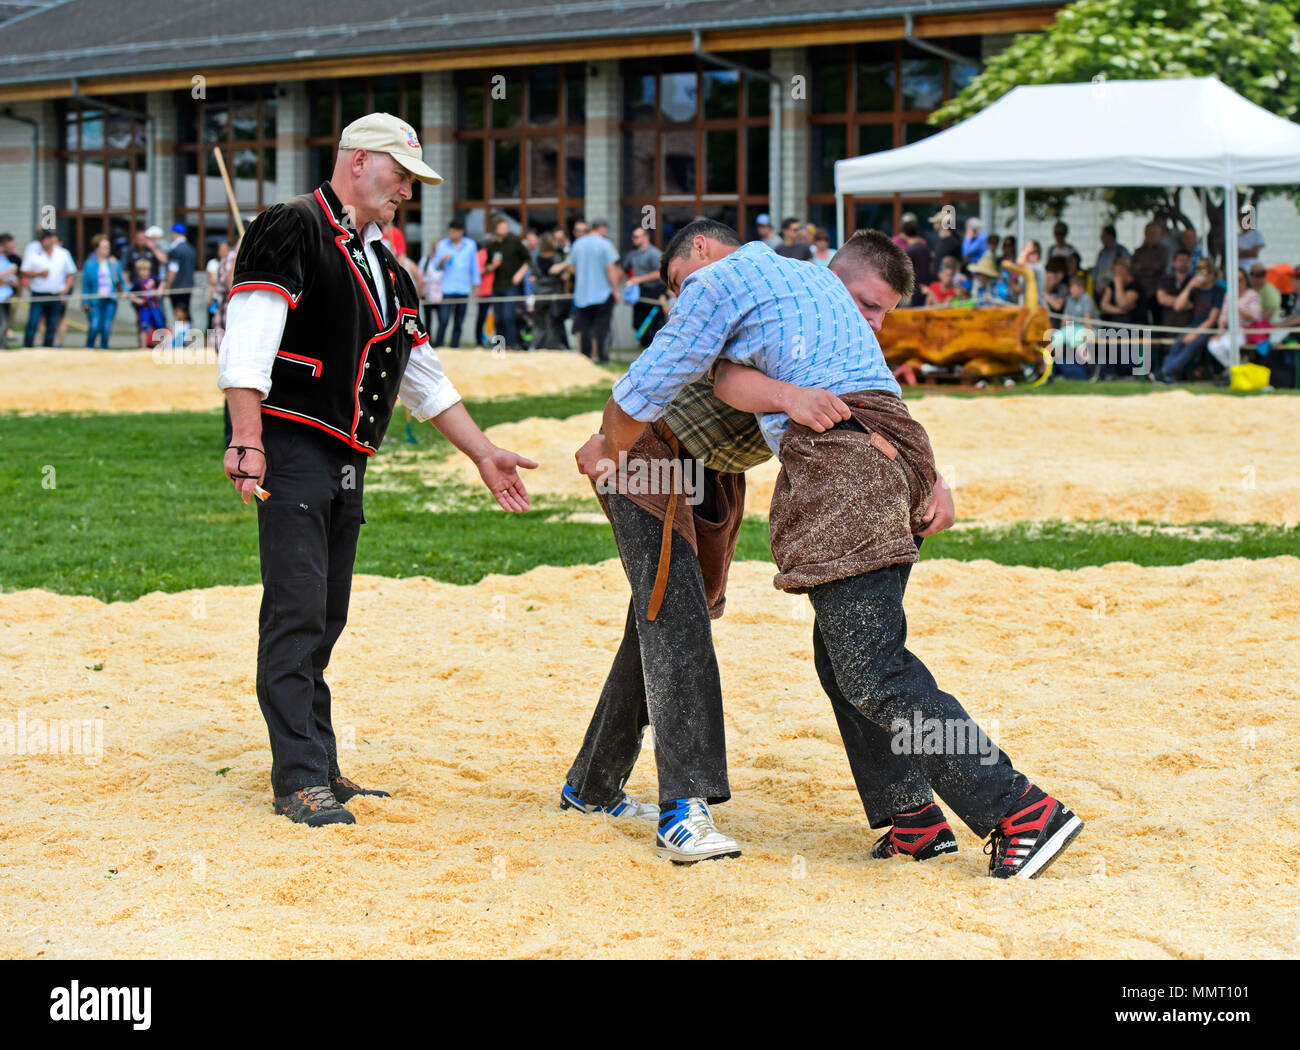 Anières, Geneva, Switzerland. 12 May 2015. Judge and Swiss wrestlers in saw dust ring, 19th Swiss wrestling festival of the Canton of Geneva, Anières, Geneva, Switzerland. Credit: GFC Collection/Alamy Live News Stock Photo